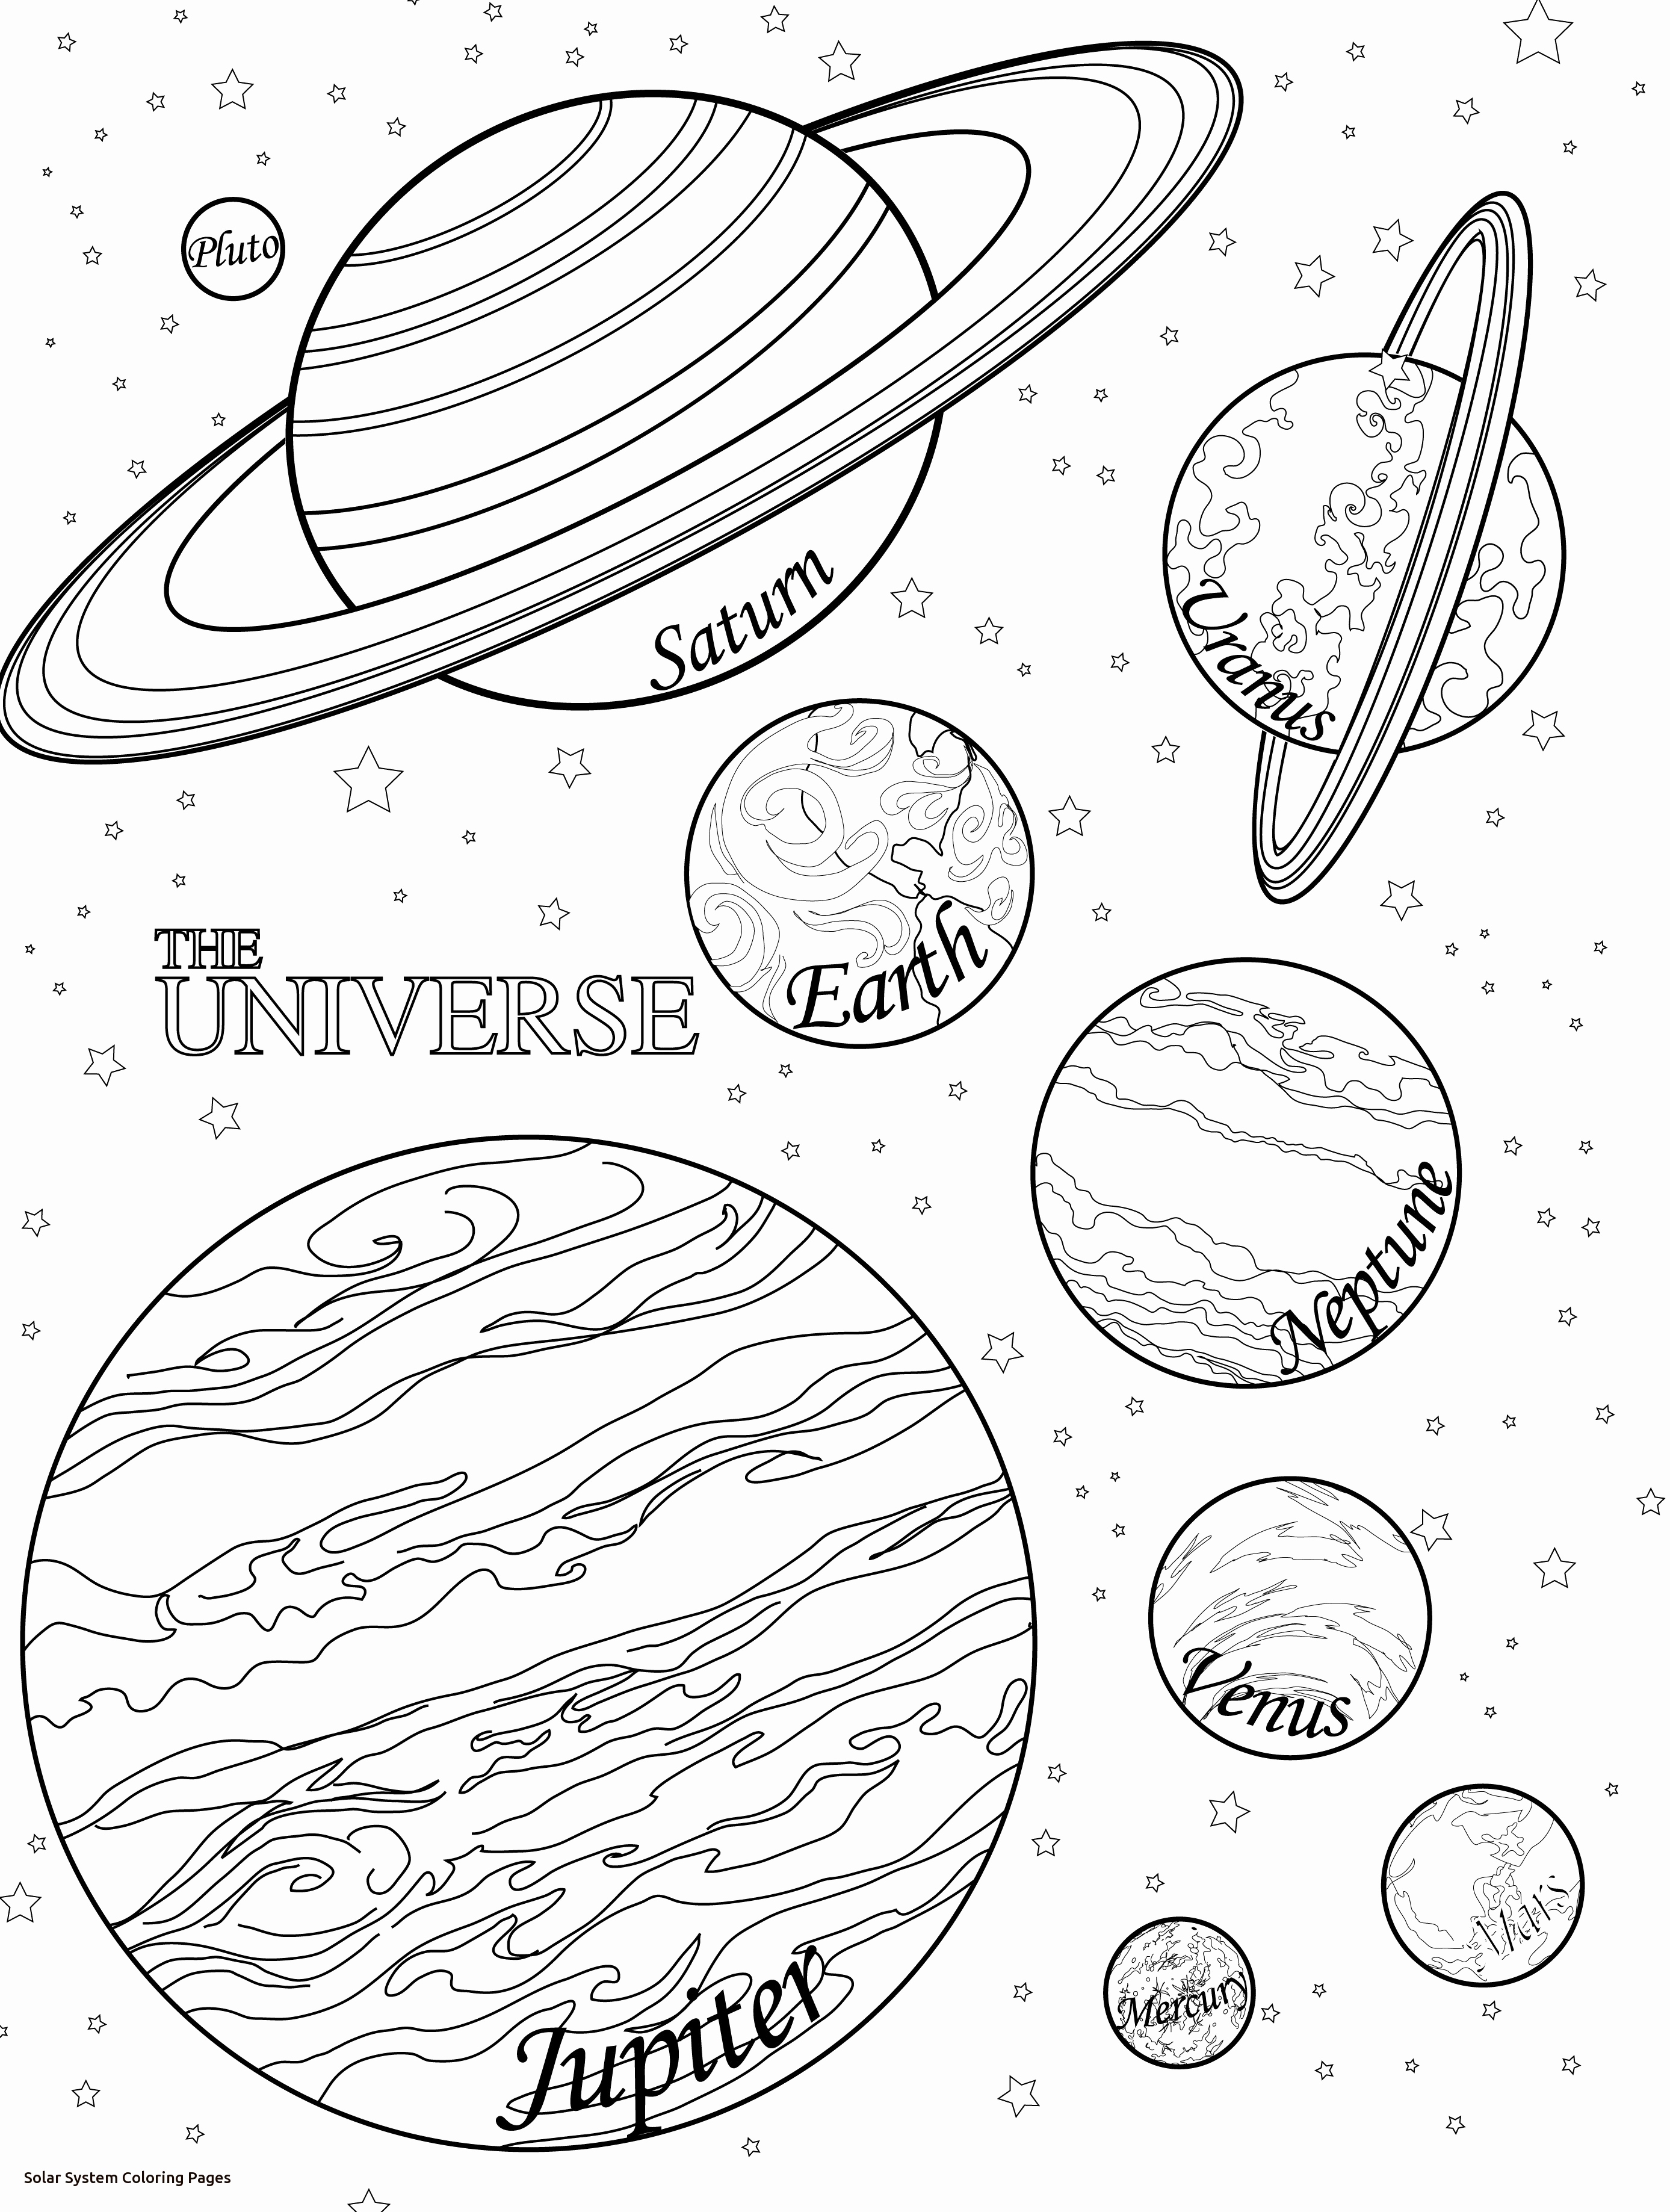 pictures of planets to color 31 planets coloring page planets coloring pages free color of to pictures planets 